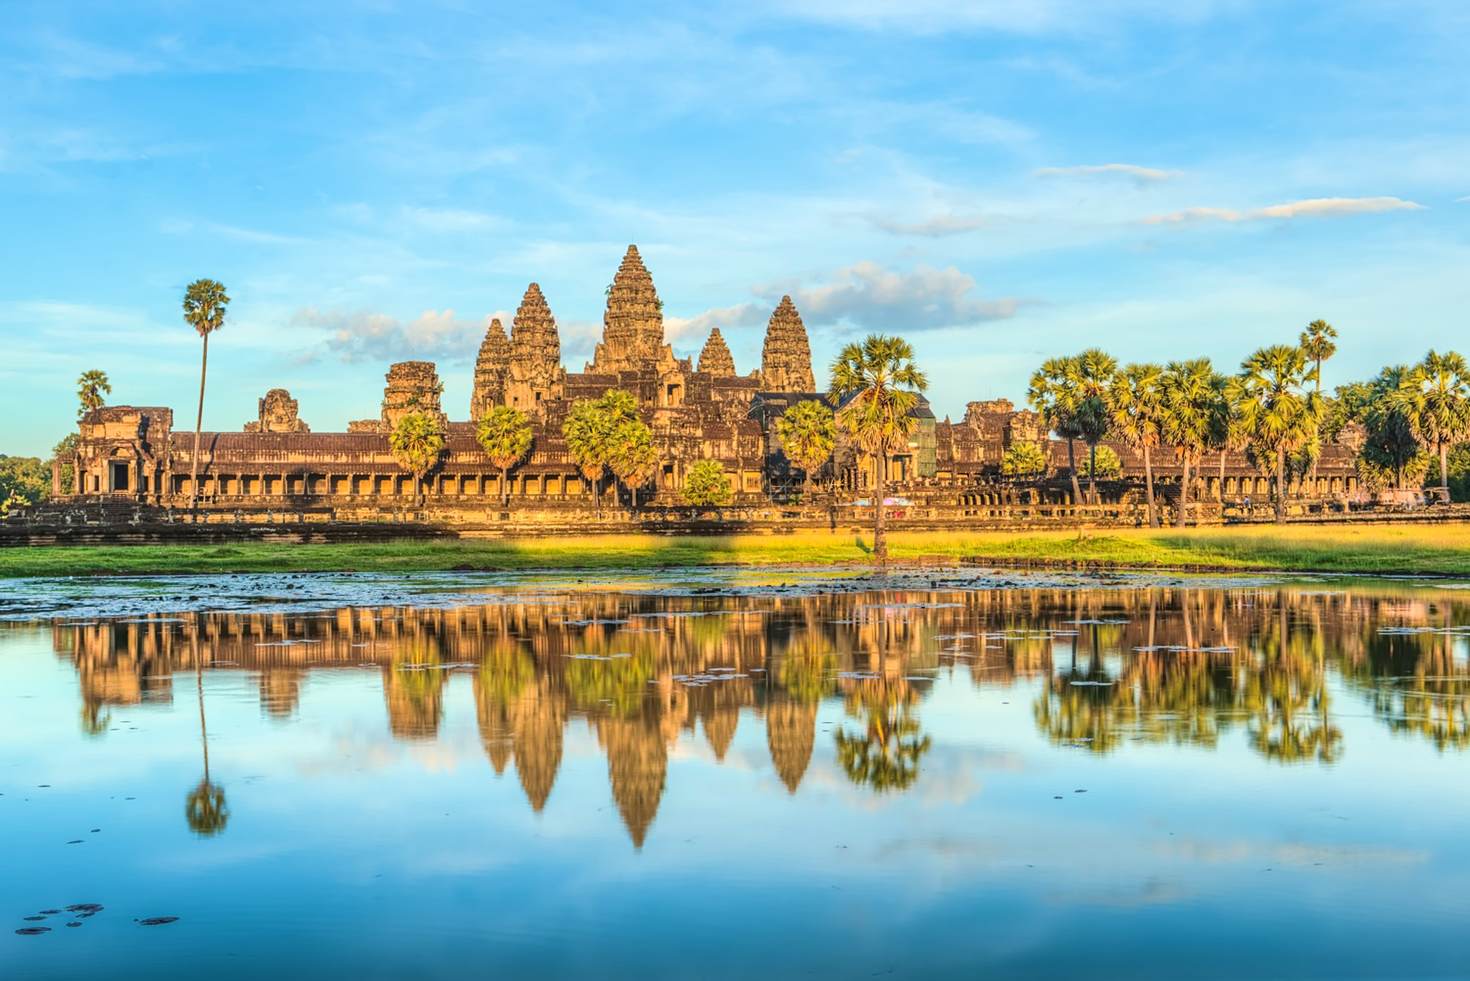 What should know about Angkor Wat